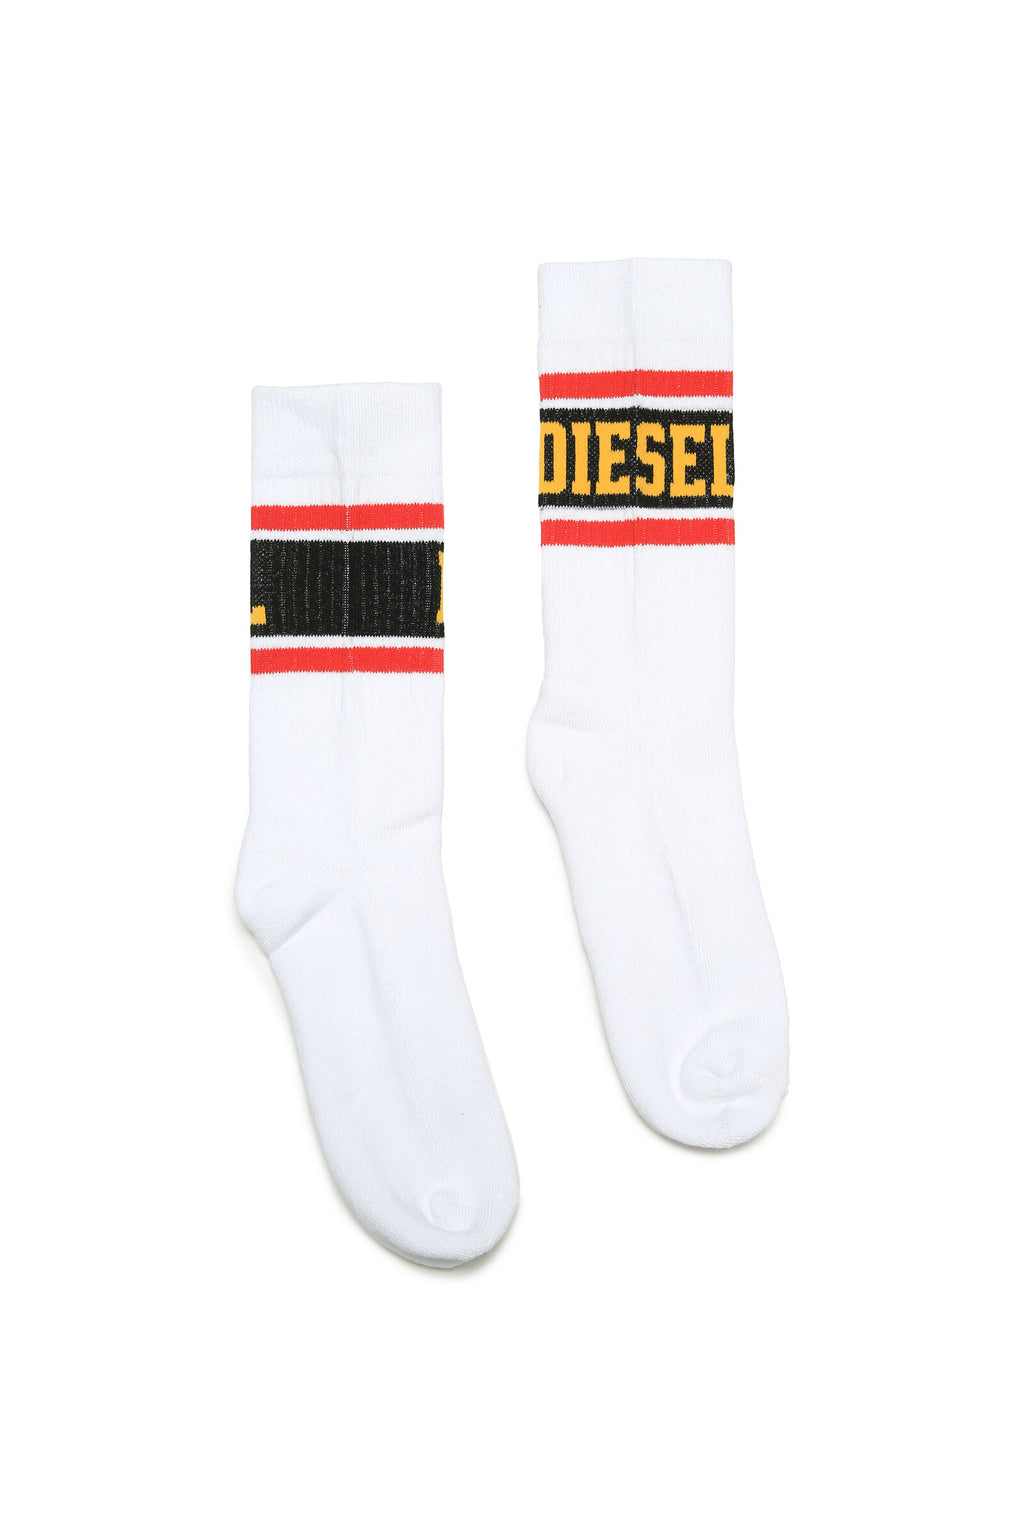 White socks with yellow and black logo